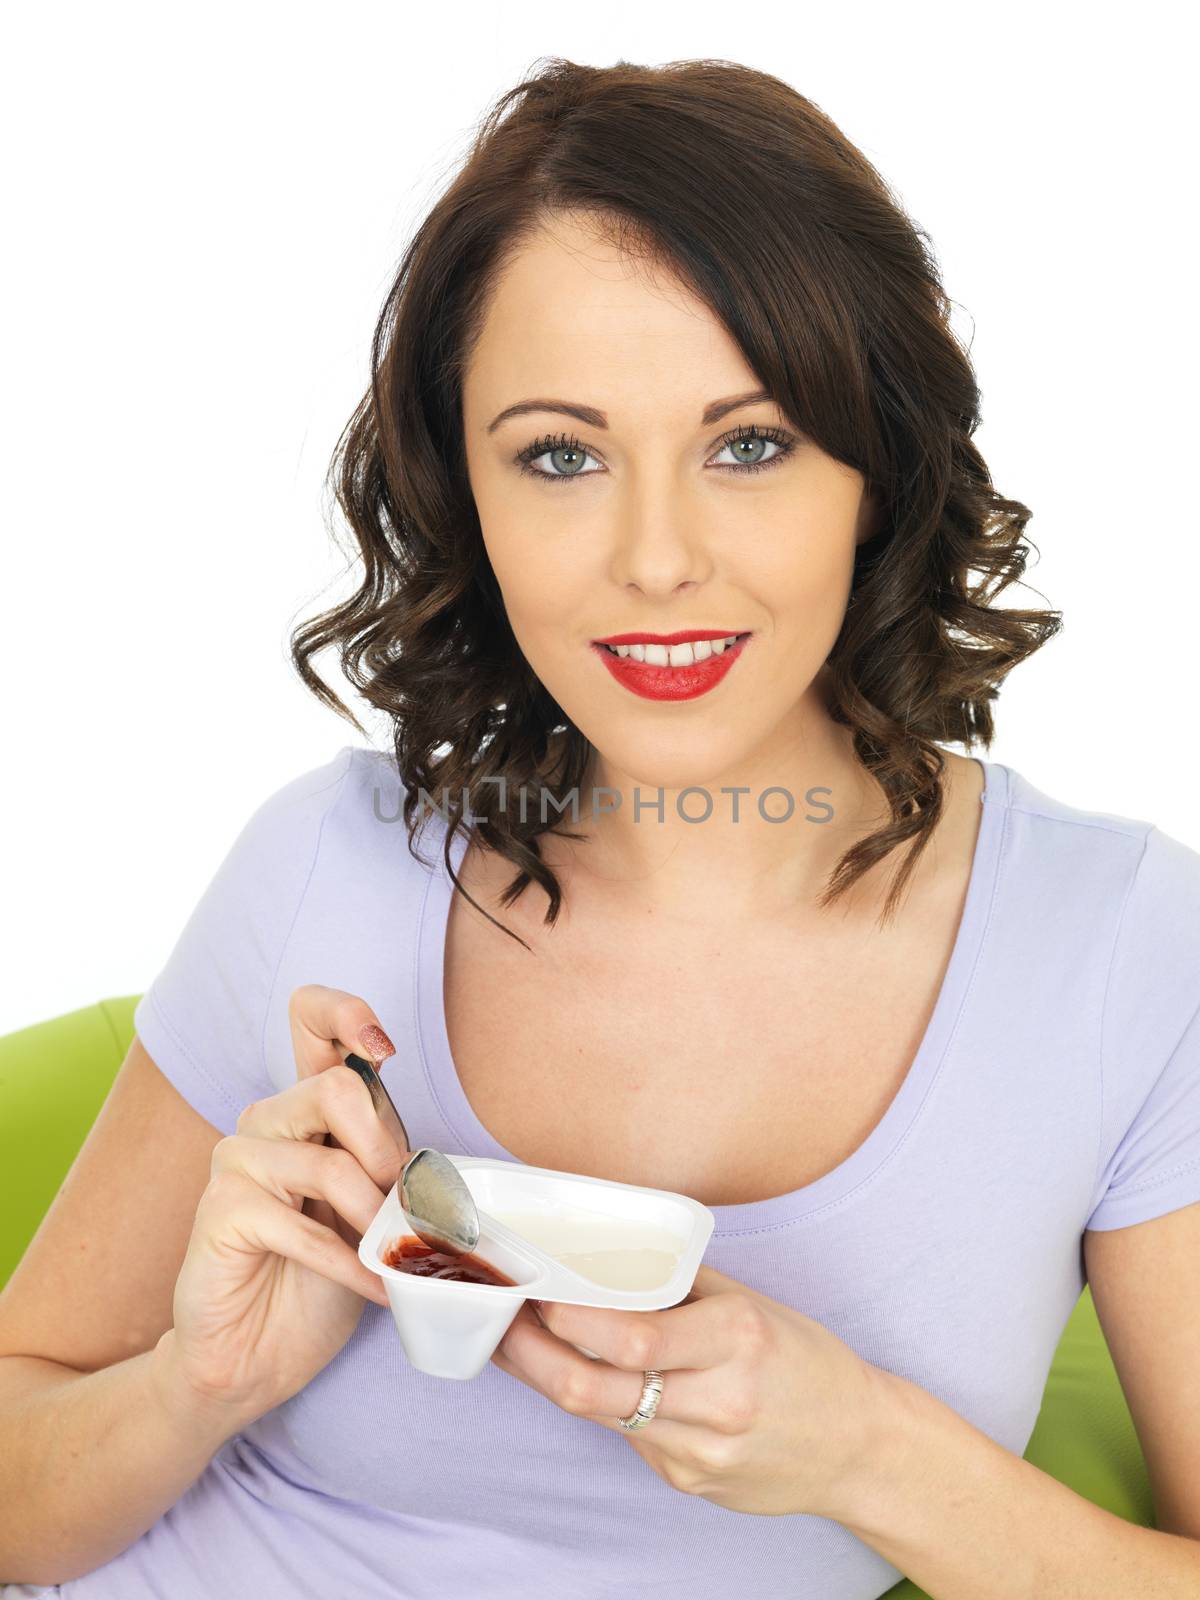 Healthy Attractive Young Woman Eating a Yogurt